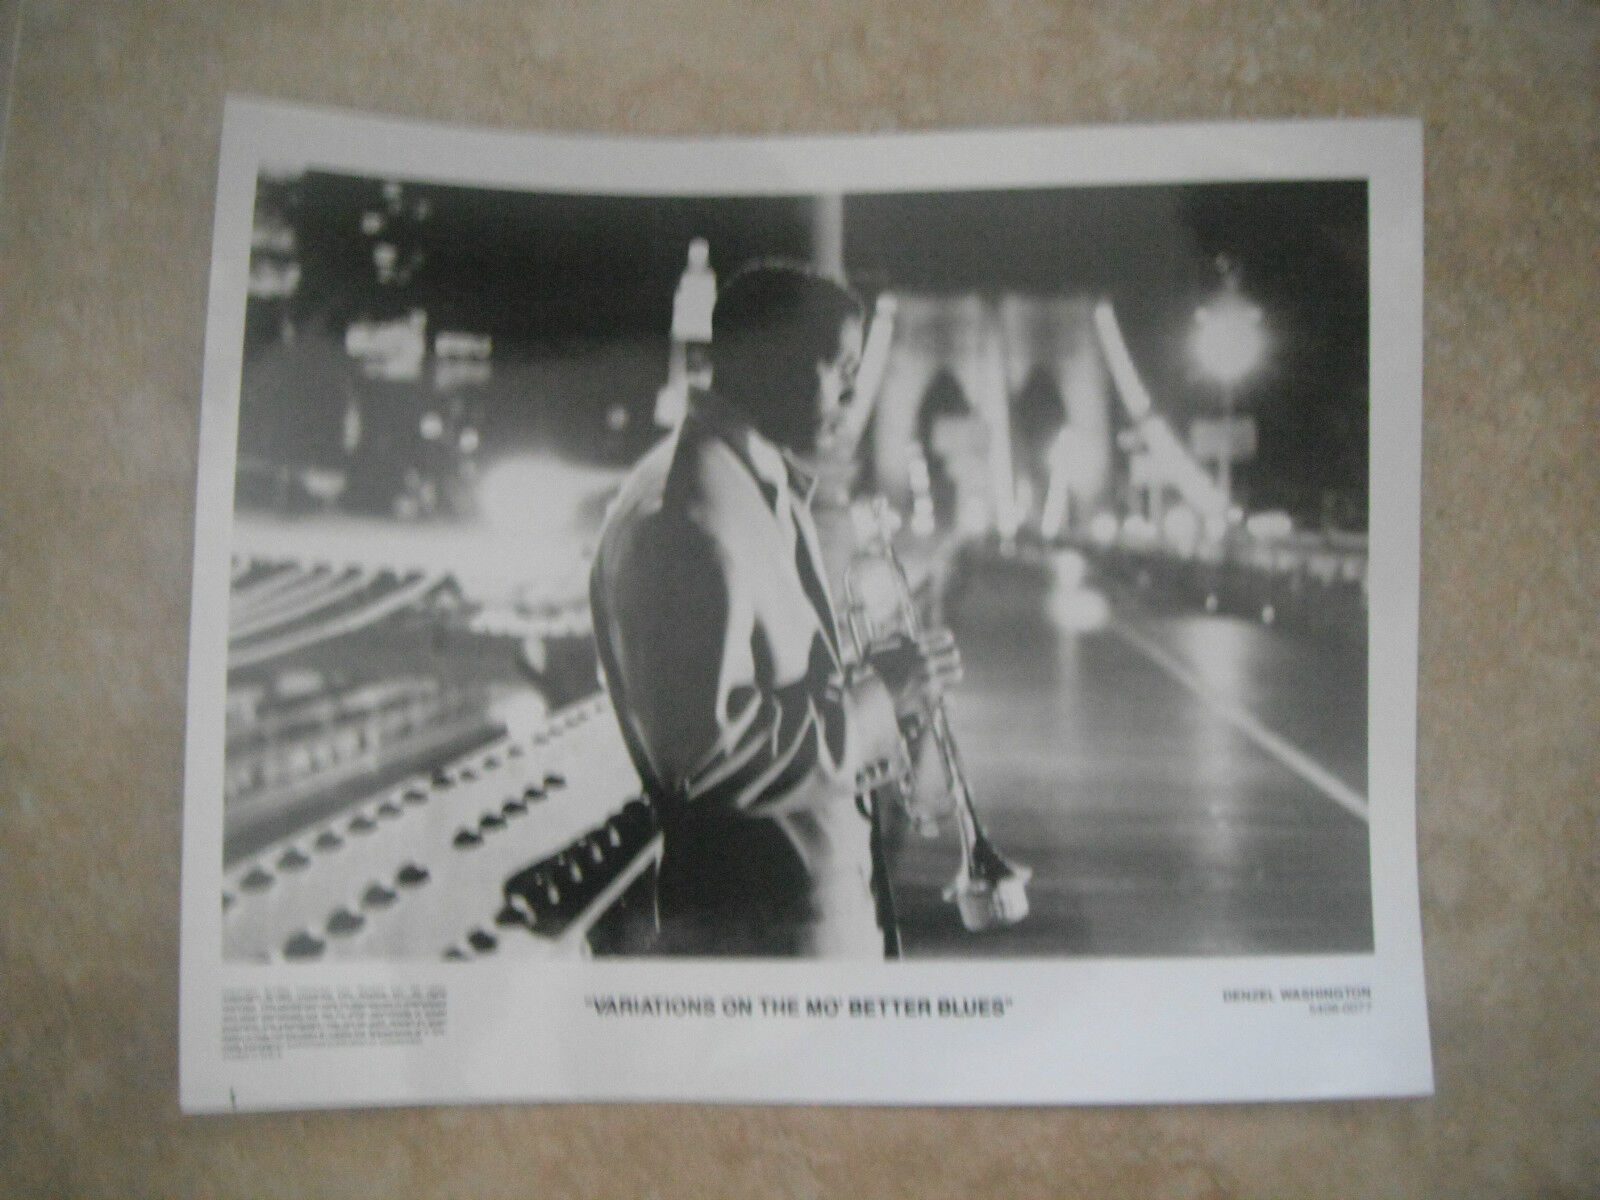 Variations on the MO' Better Blues Denzel B&W 8x10 Promo Photo Poster painting Original Lobby